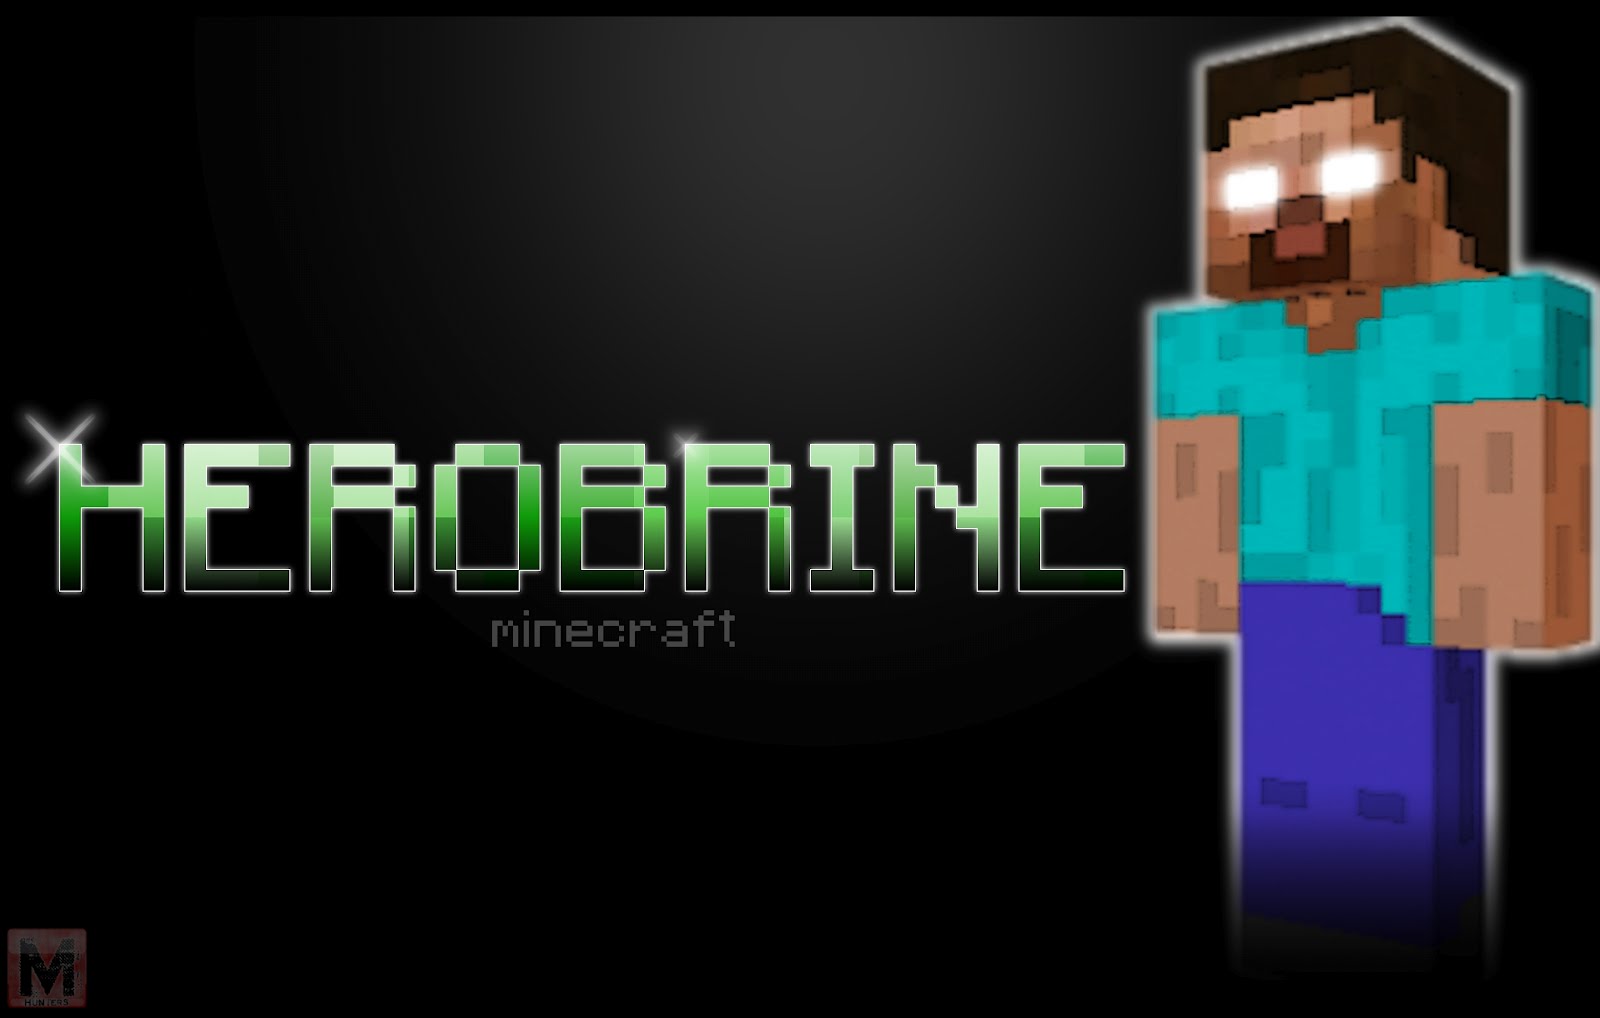 Here Is Minecraft Herobrine Wallpaper And Photos Gallery